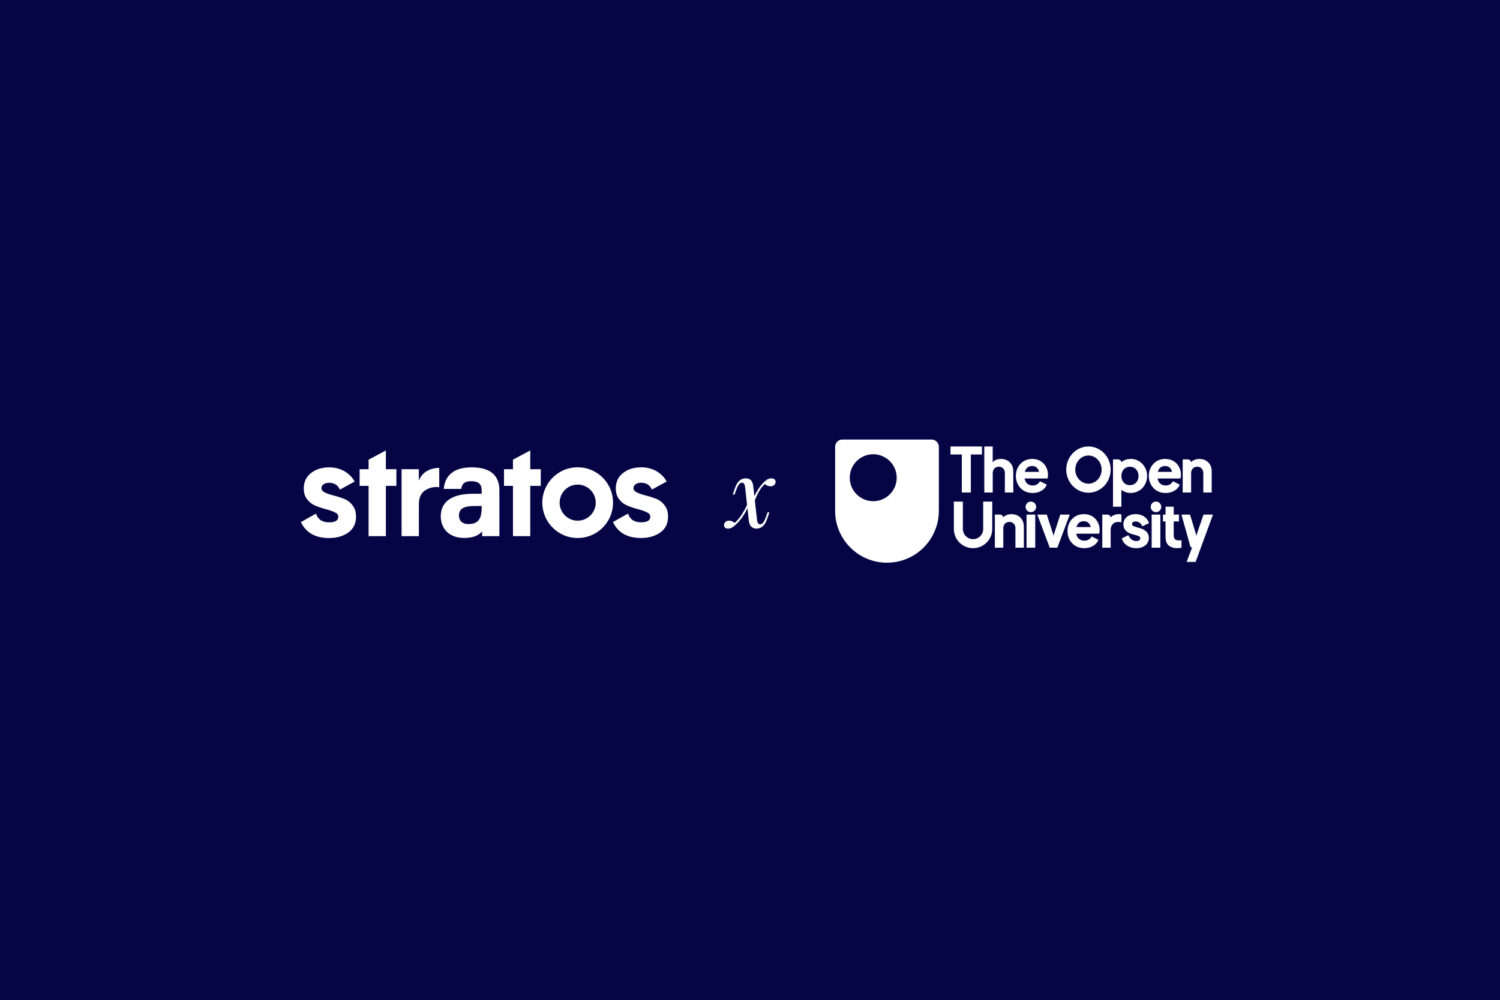 stratos and the open university logos in white on a blue background